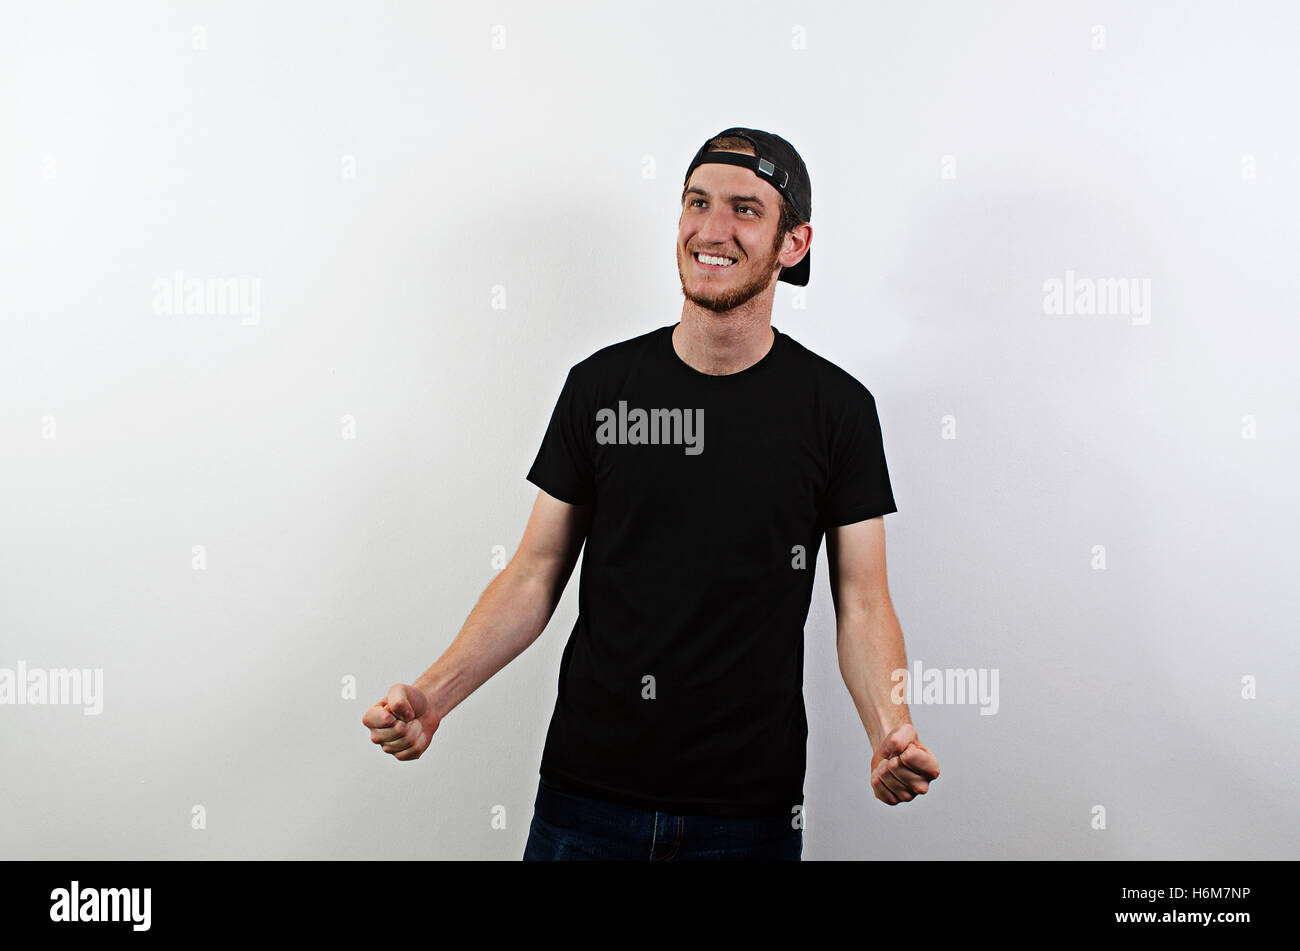 Joyful Happy Smiling Young Adult Male in Dark T-Shirt and Baseball Hat Worn Backwards Stock Photo